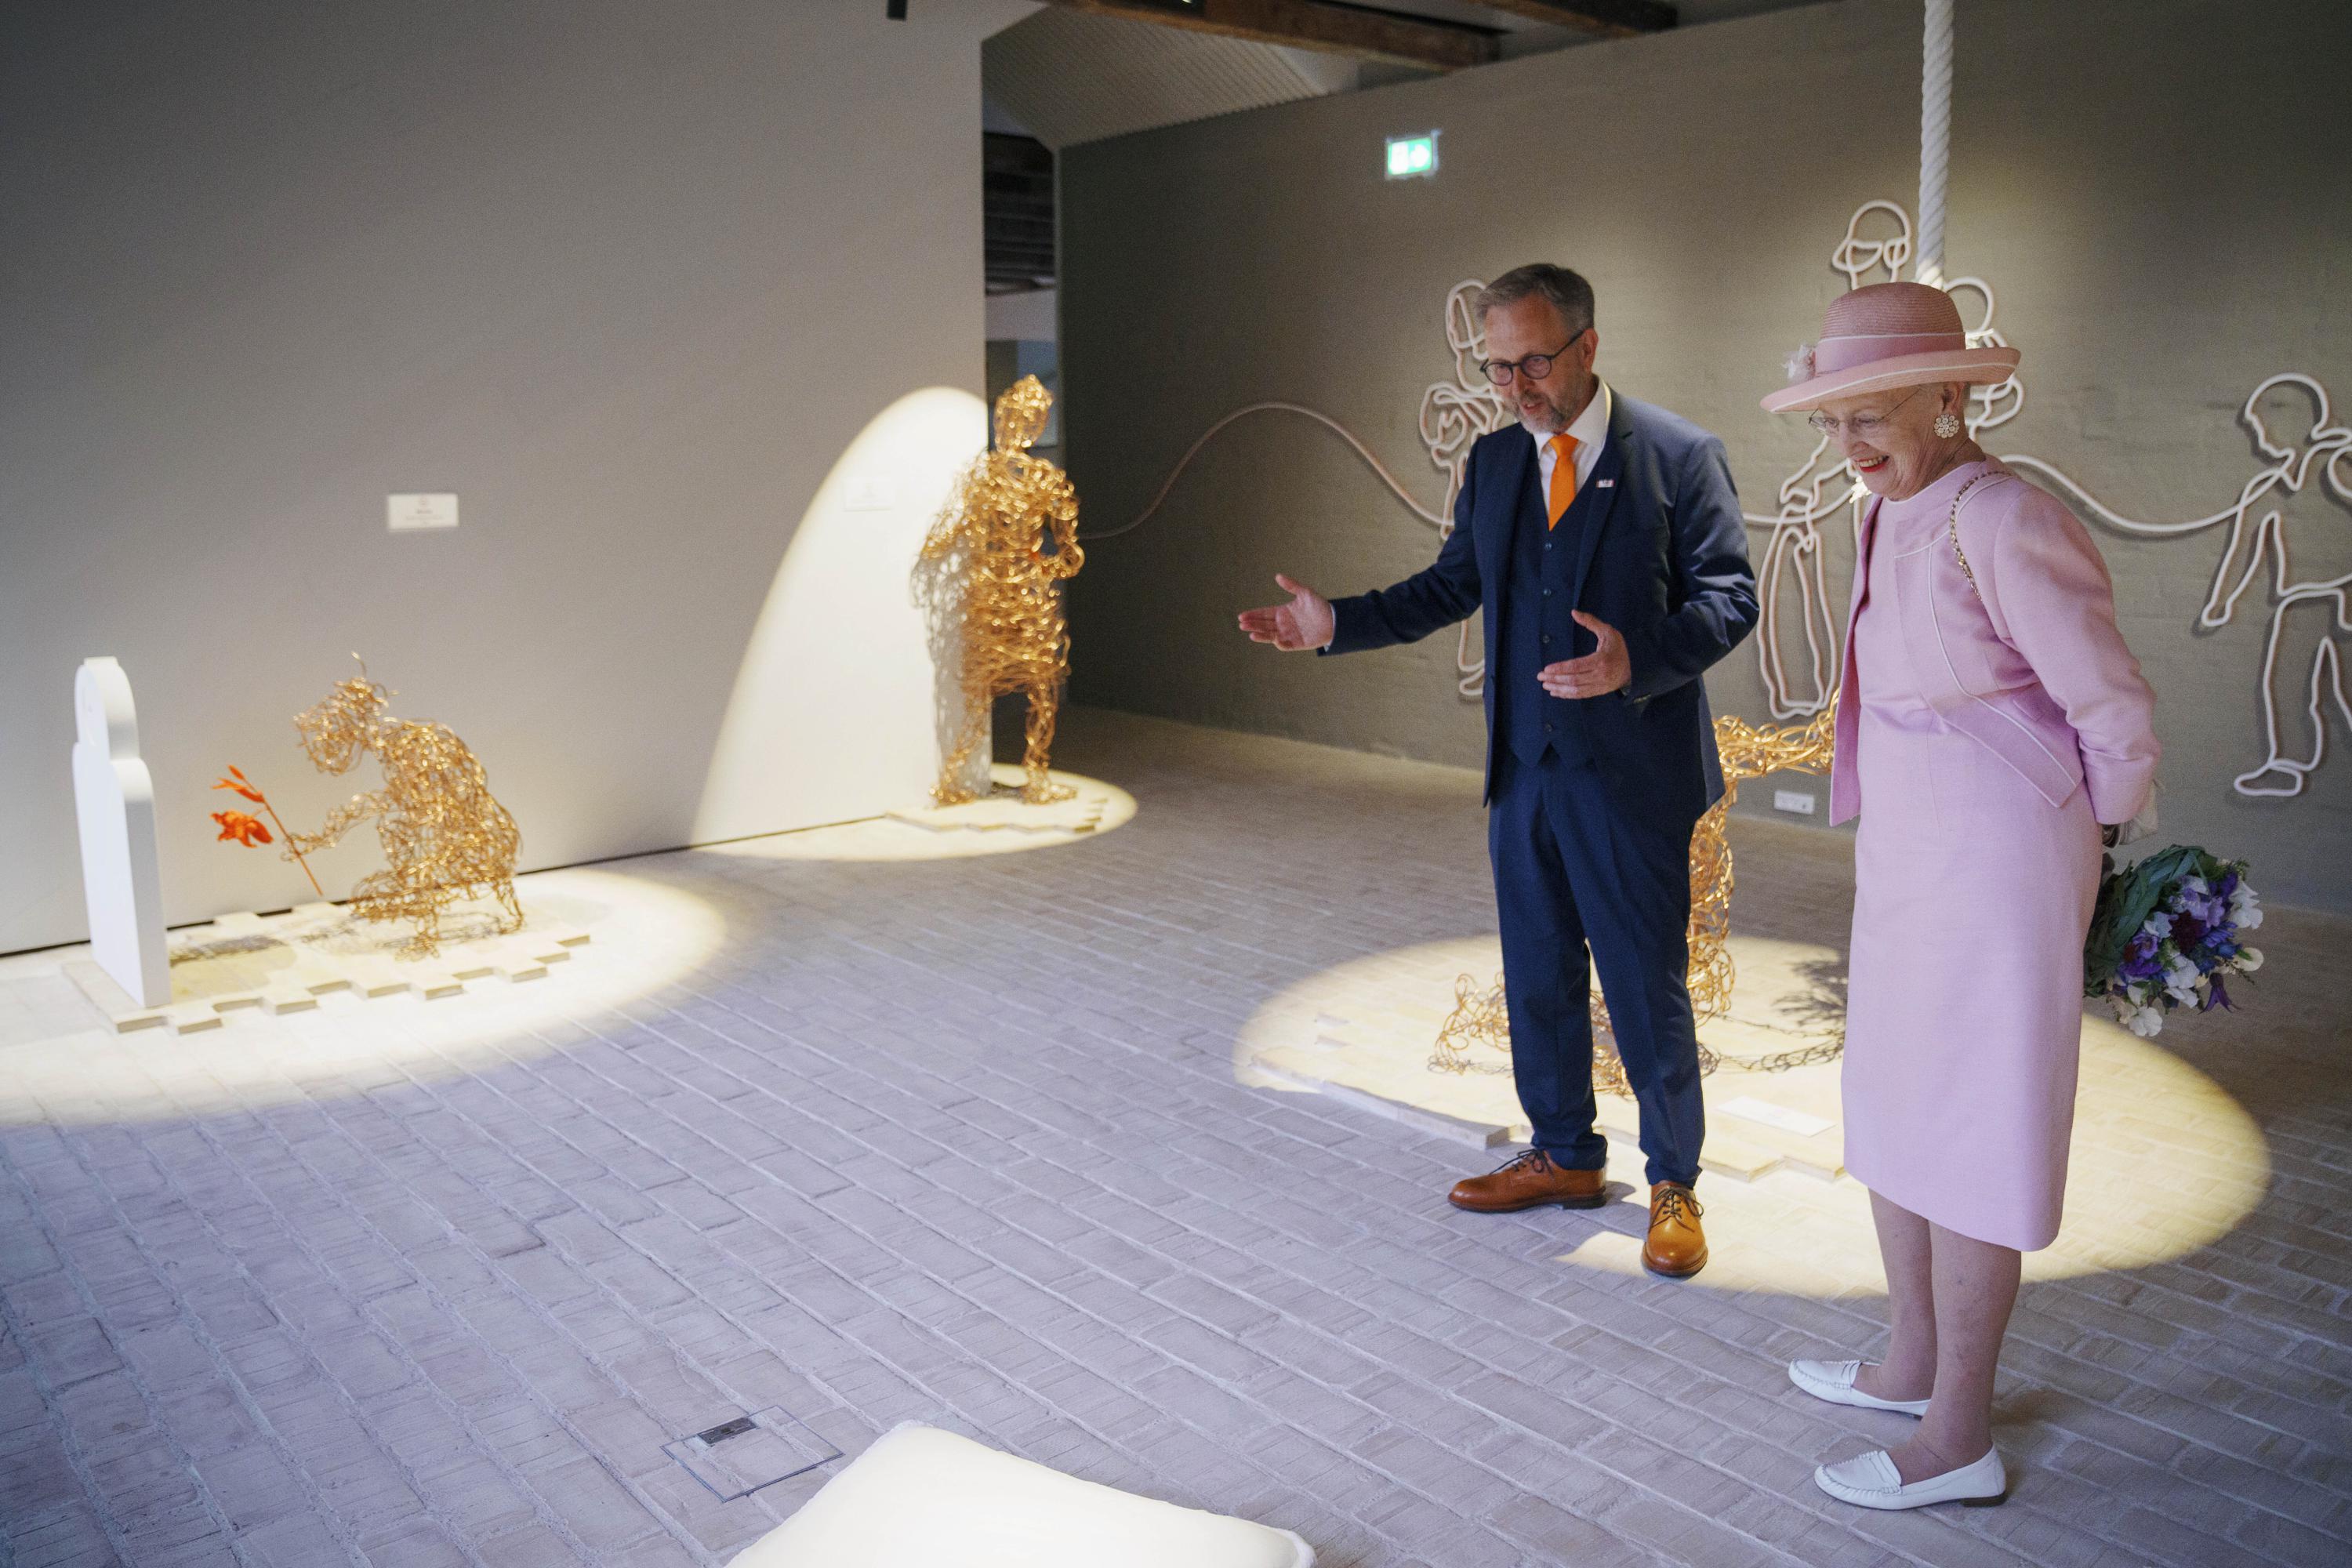 Danish queen opens new museum telling the story of refugees